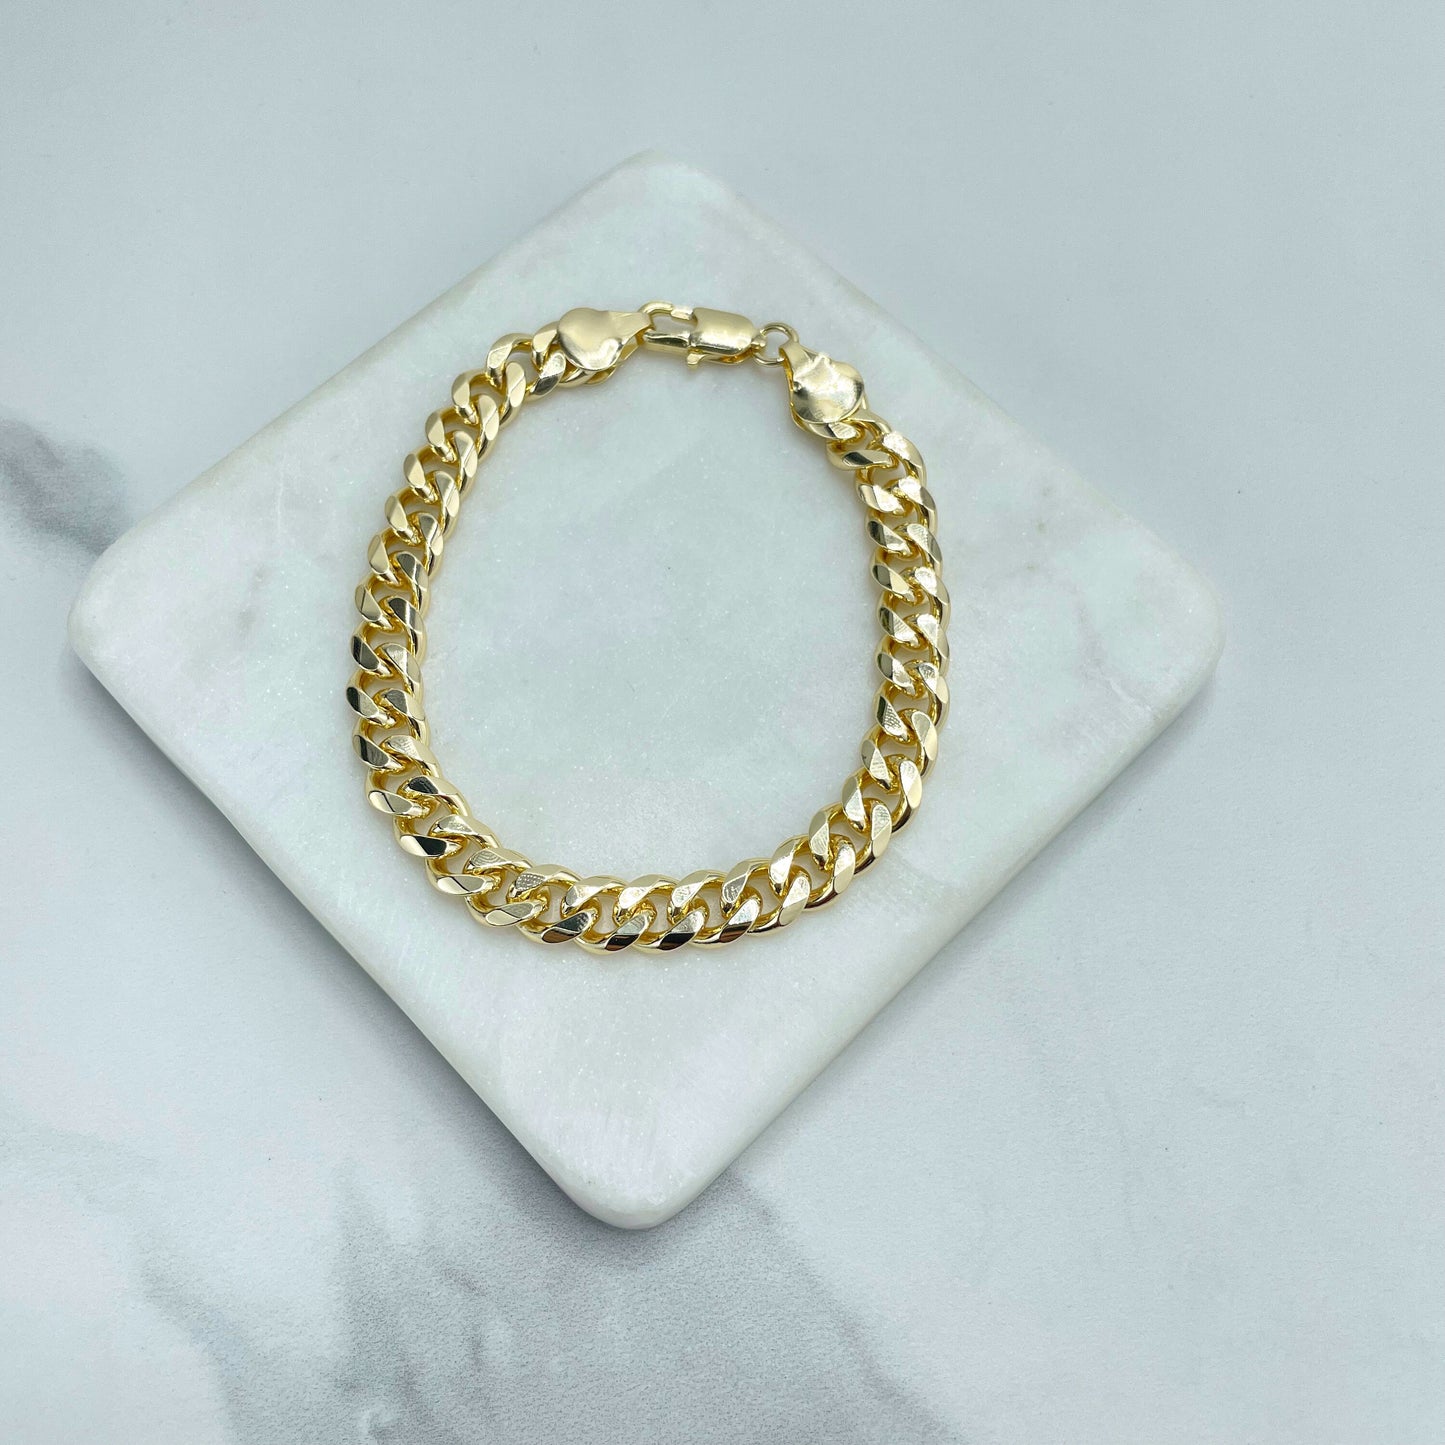 18k Gold Filled 9mm Flat Curb Link Chain, Flat Cuban Link Bracelet, Wholesale Jewelry Making Supplies